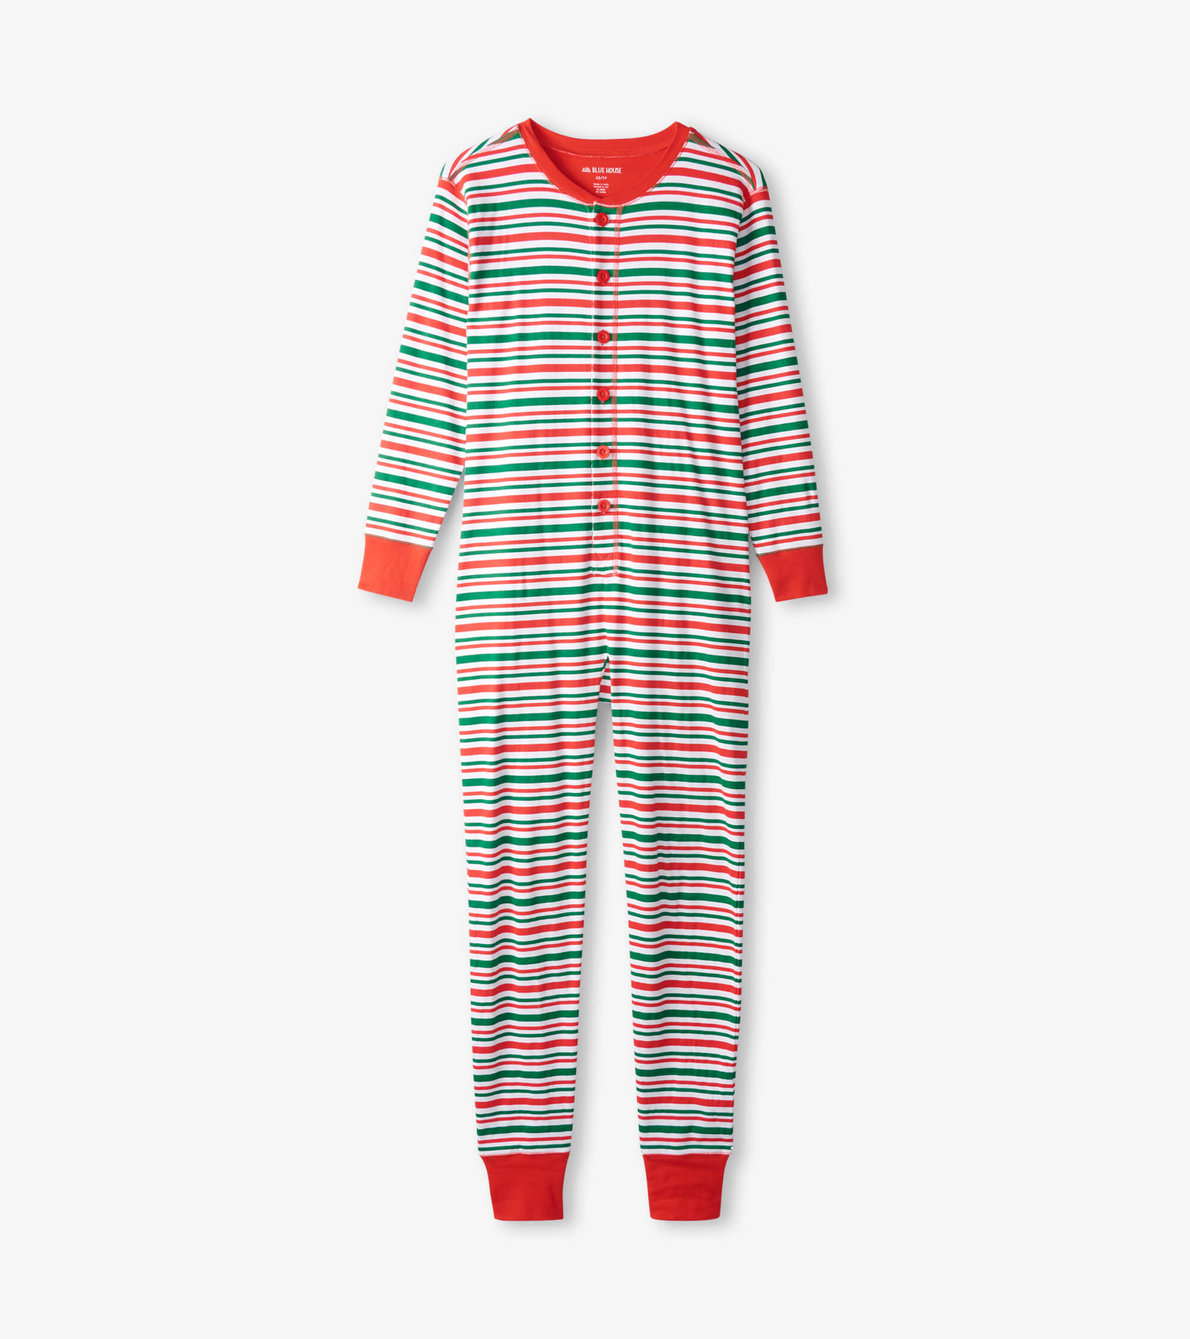 View larger image of Adult Jingle All The Way Onesie